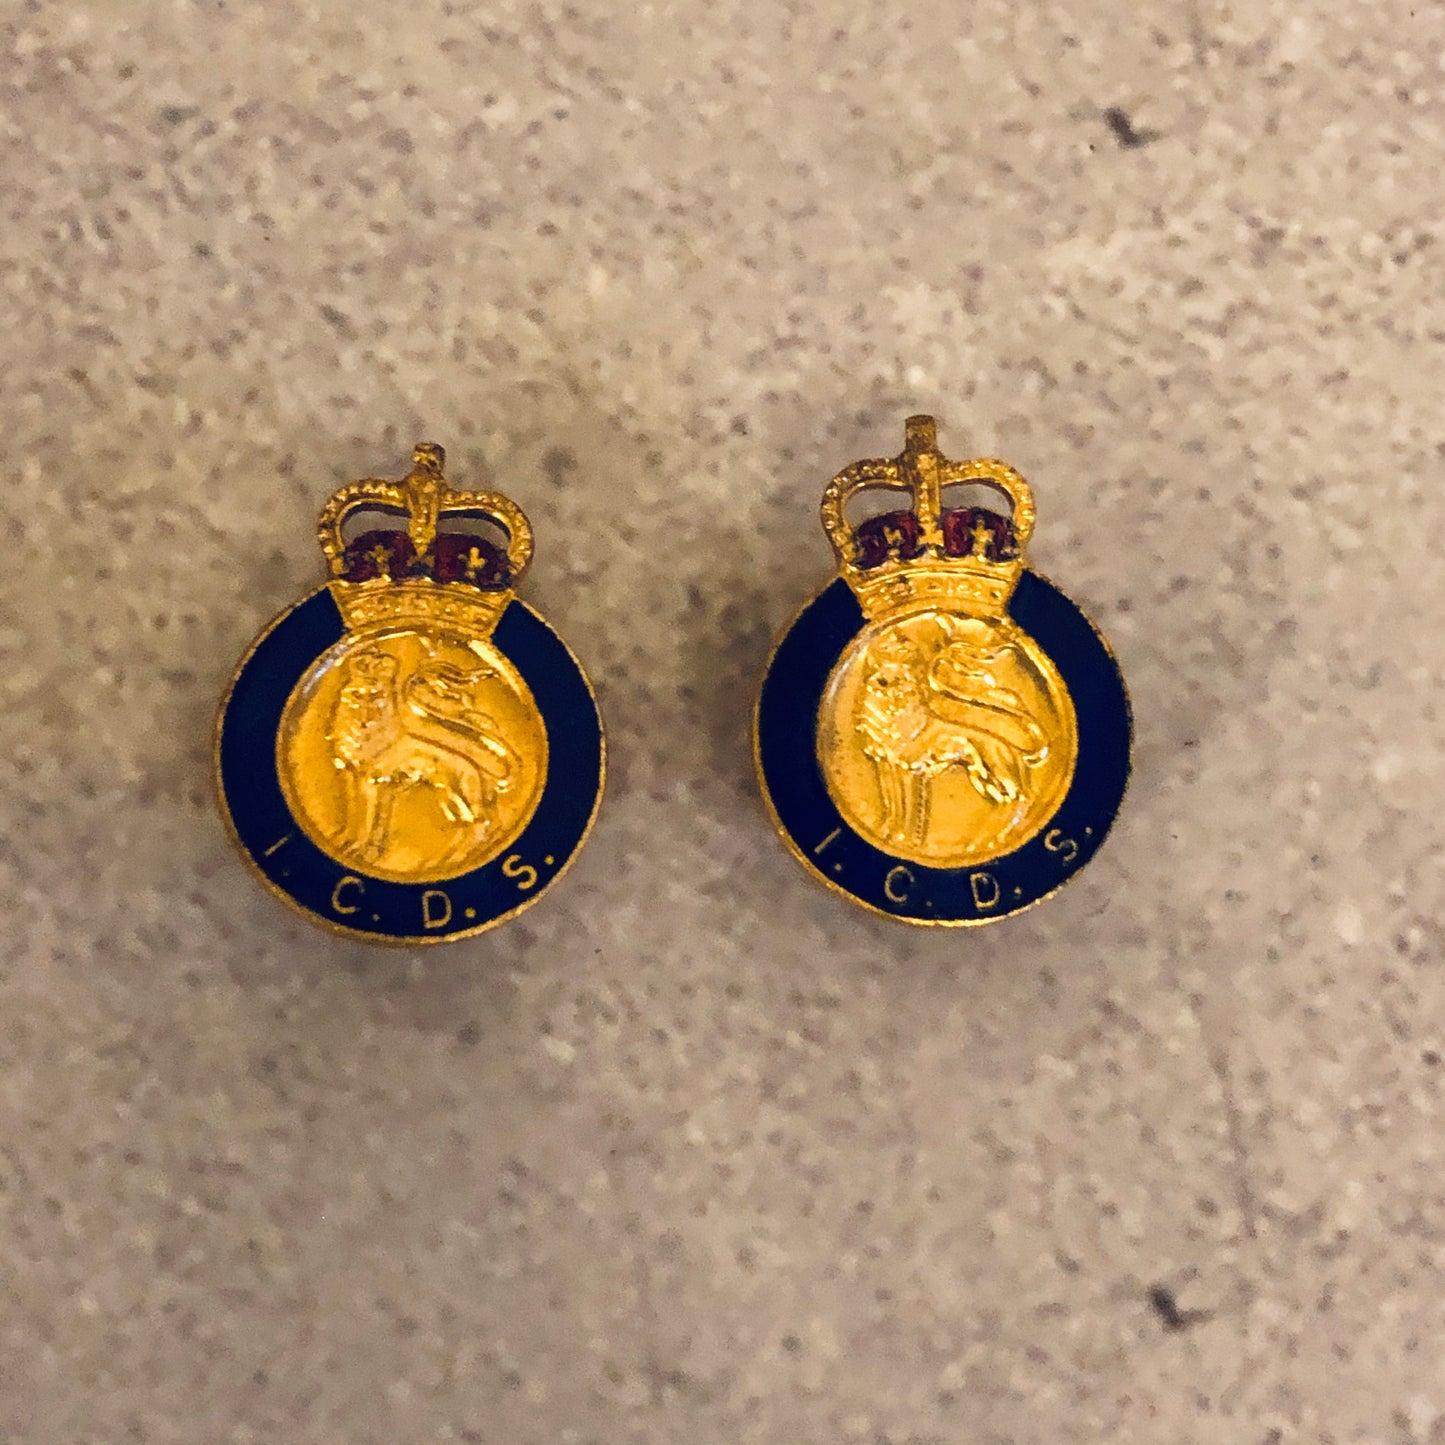 The Director Aston - Pair of Vintage Industrial Civil Defence Service Badge